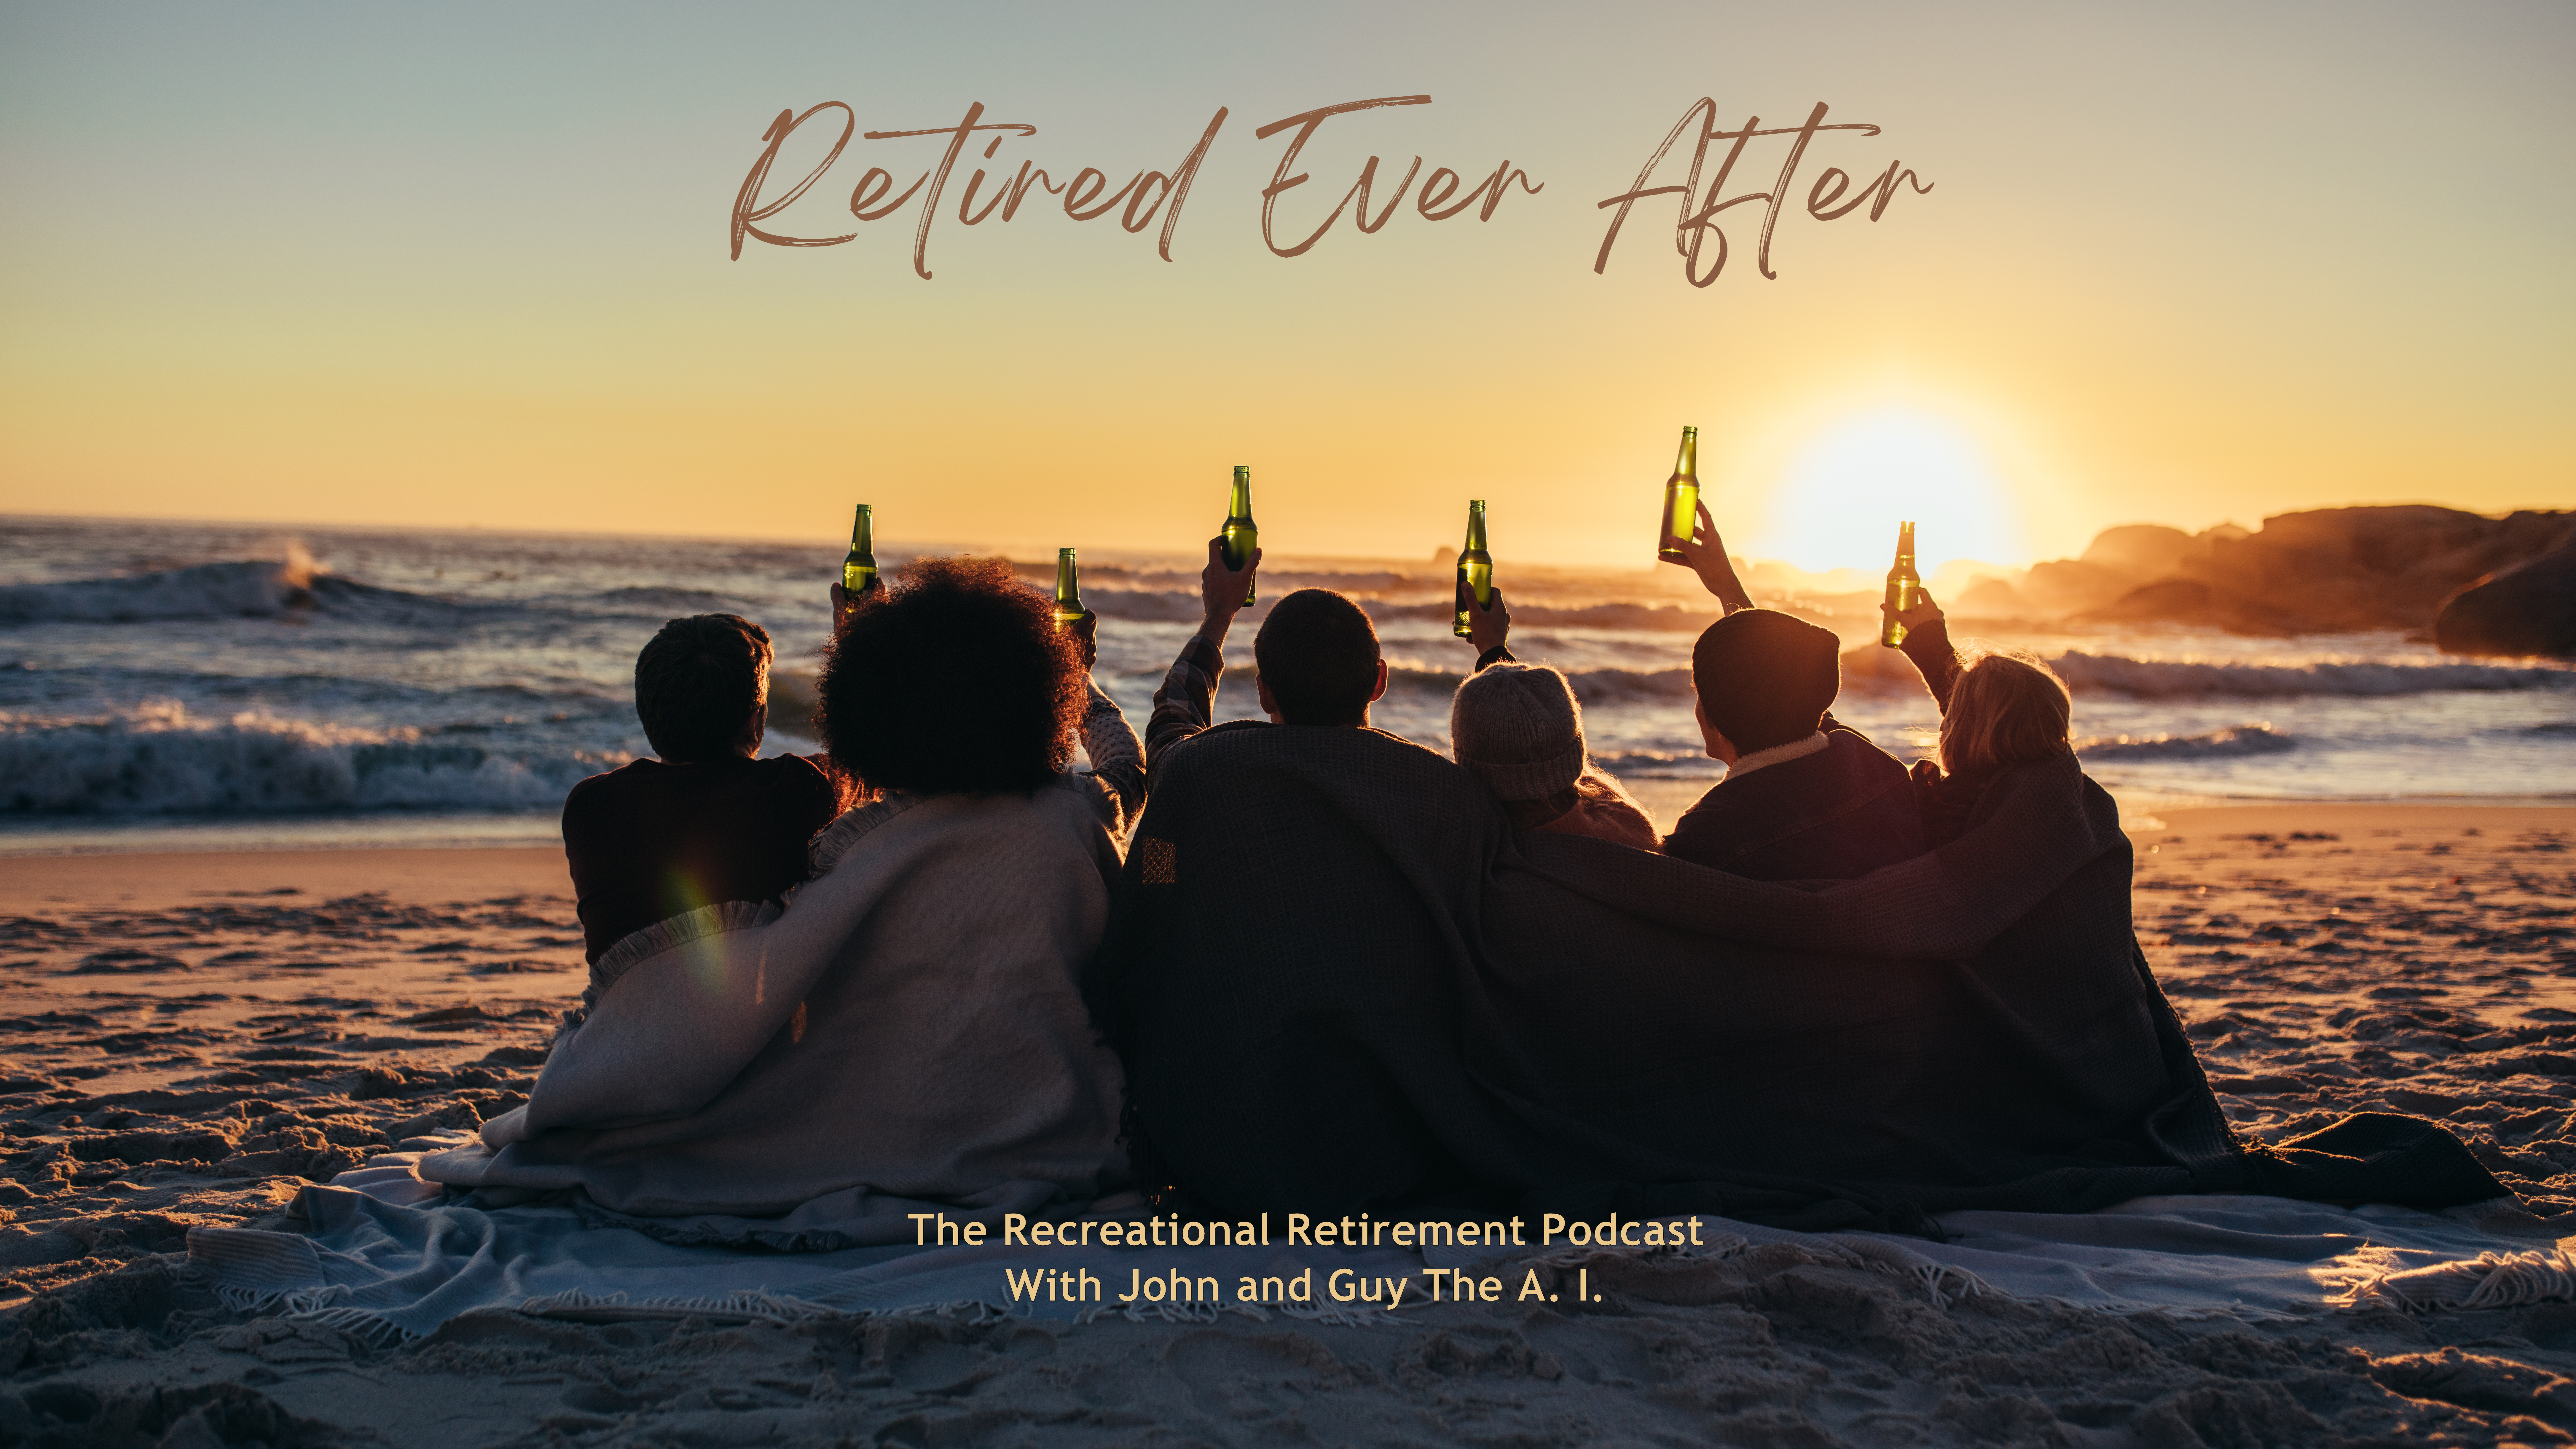 Retired Ever After - The Recreational Retirement Podcast with John and Guy The A. I.